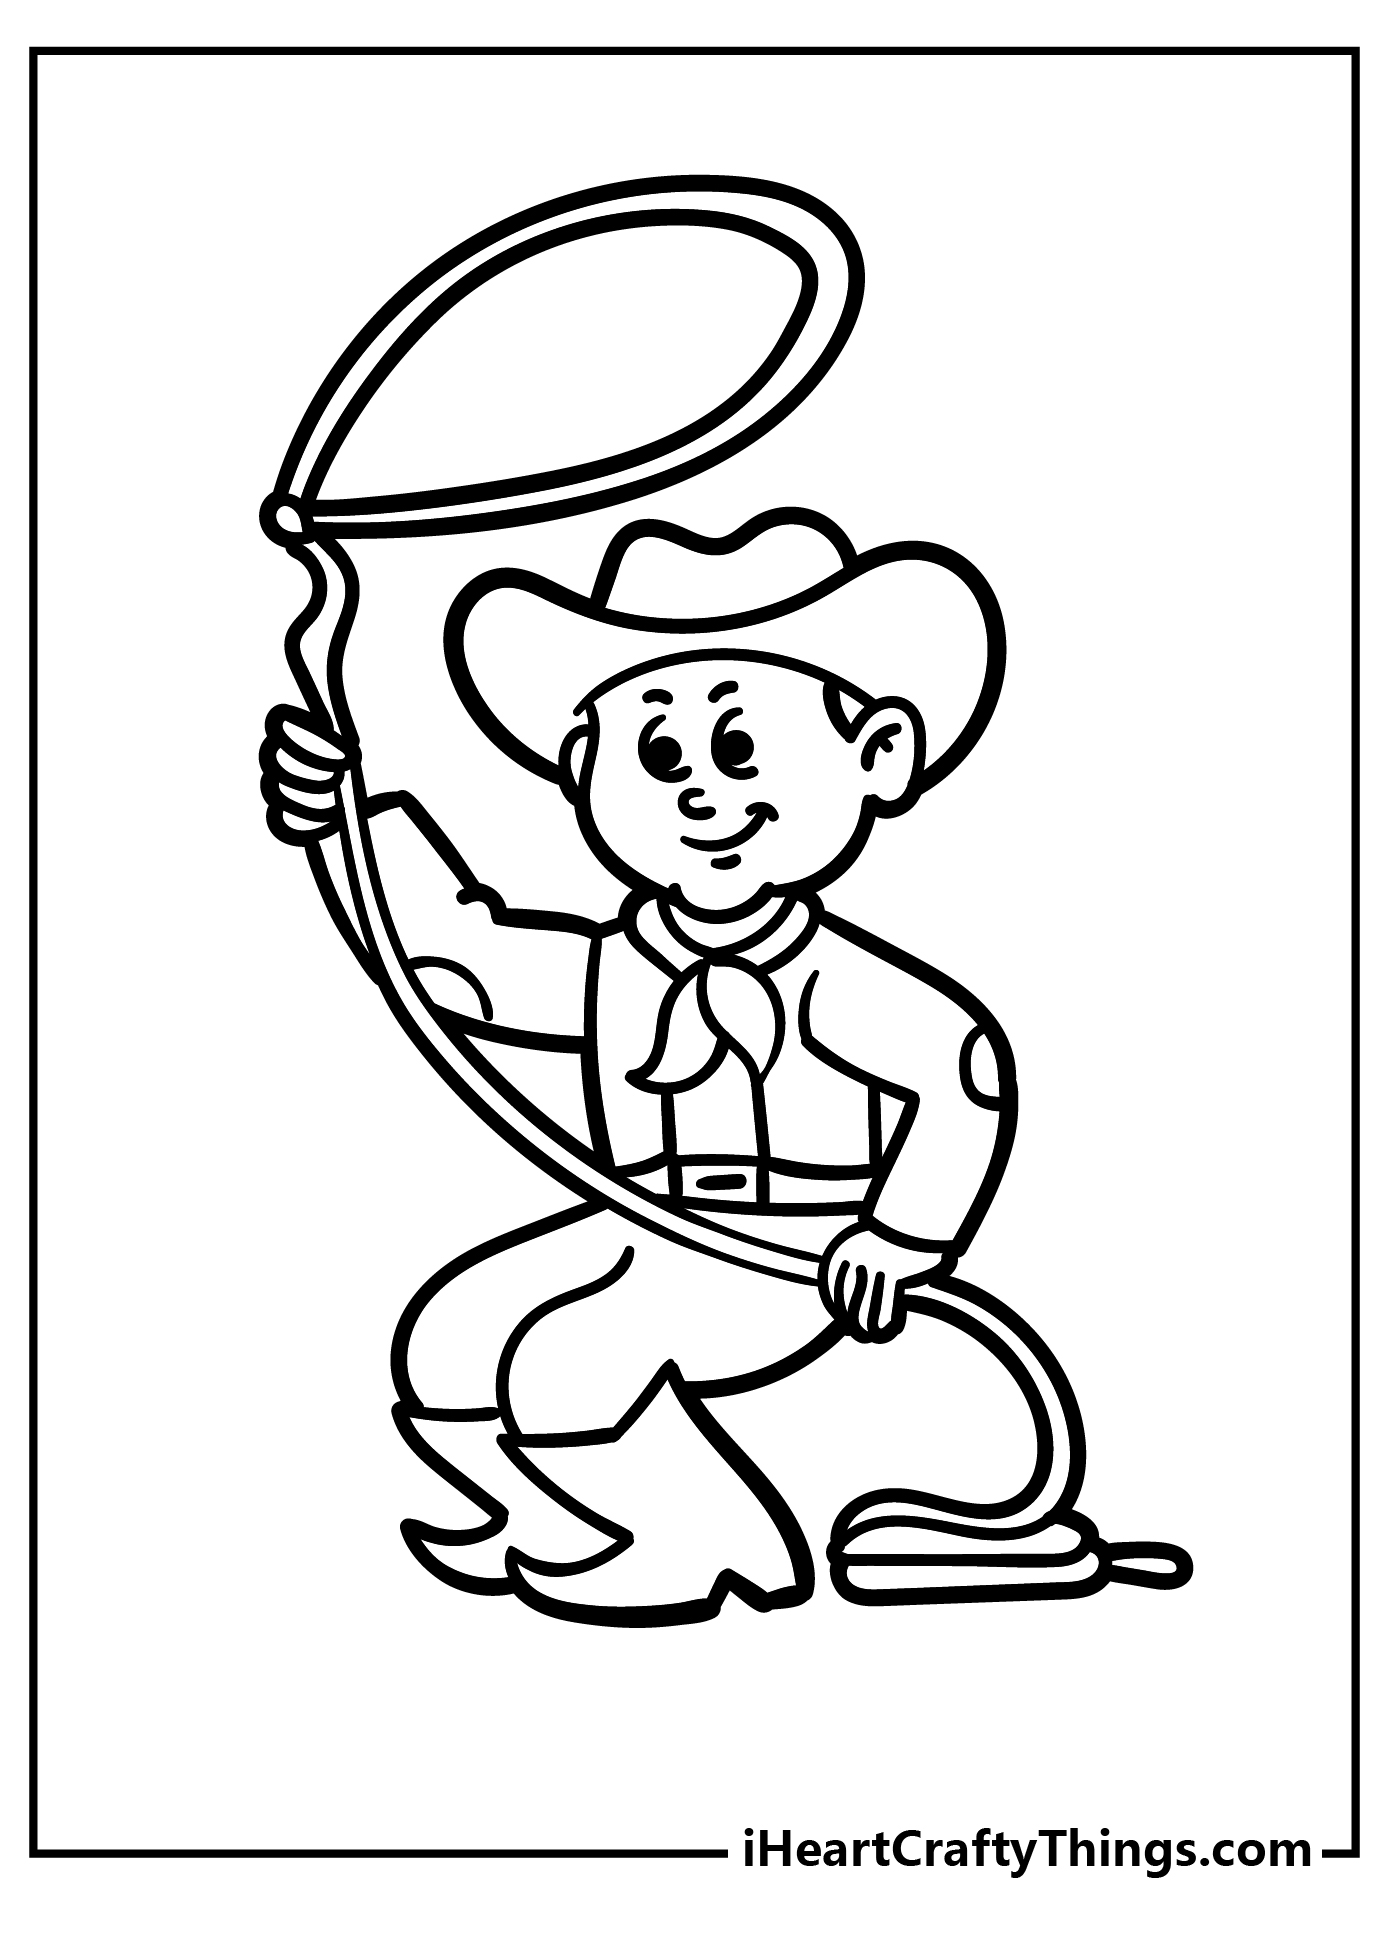 Printable Cowboy Coloring Pages Updated 20